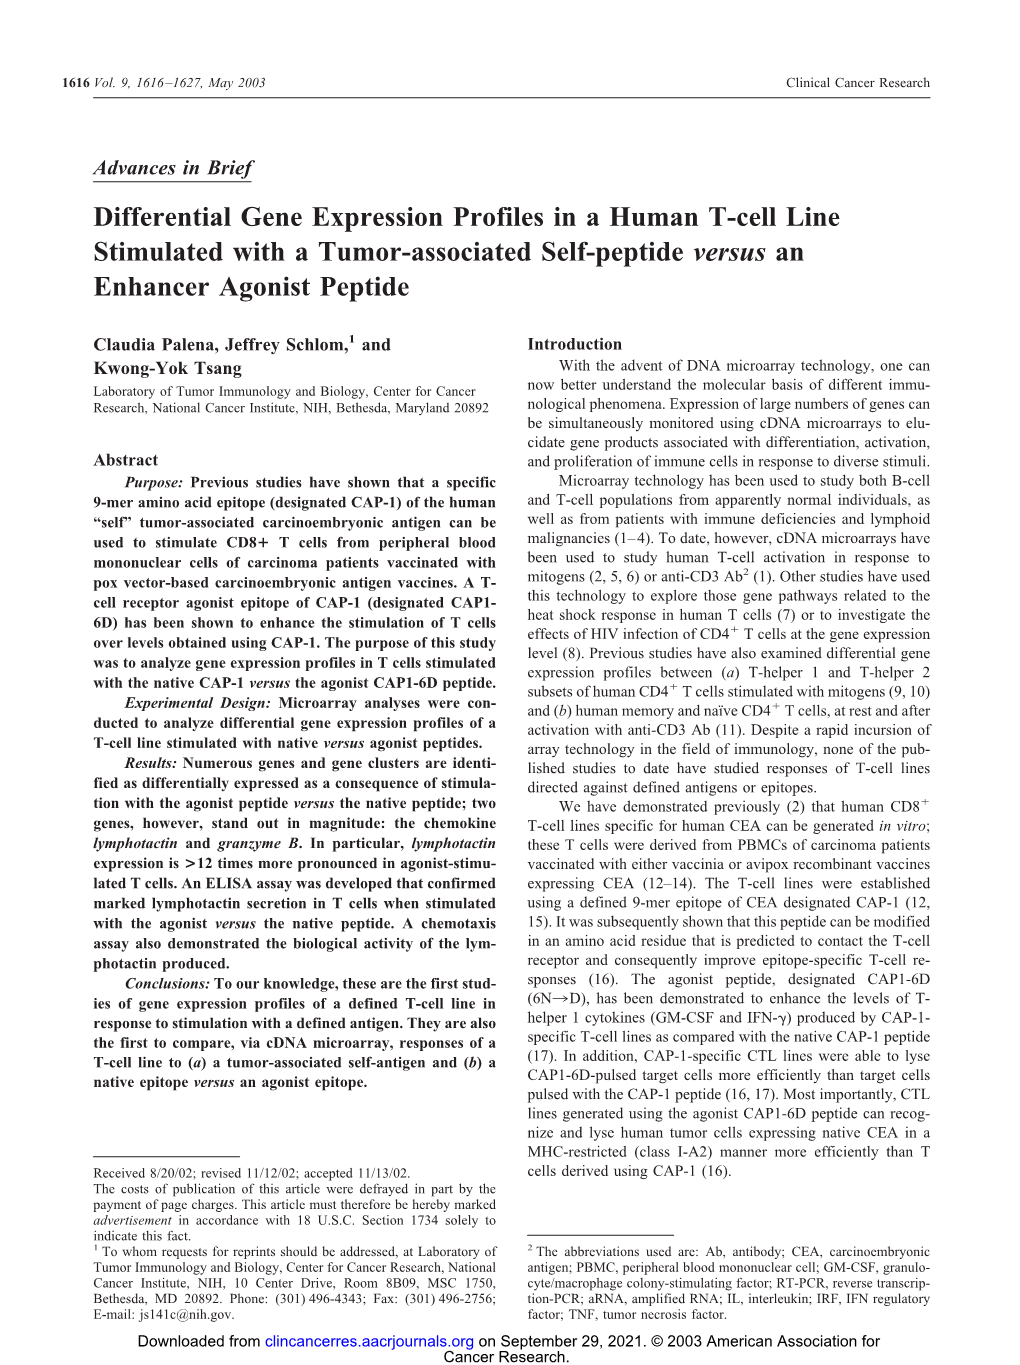 Differential Gene Expression Profiles in a Human T-Cell Line Stimulated with a Tumor-Associated Self-Peptide Versus an Enhancer Agonist Peptide